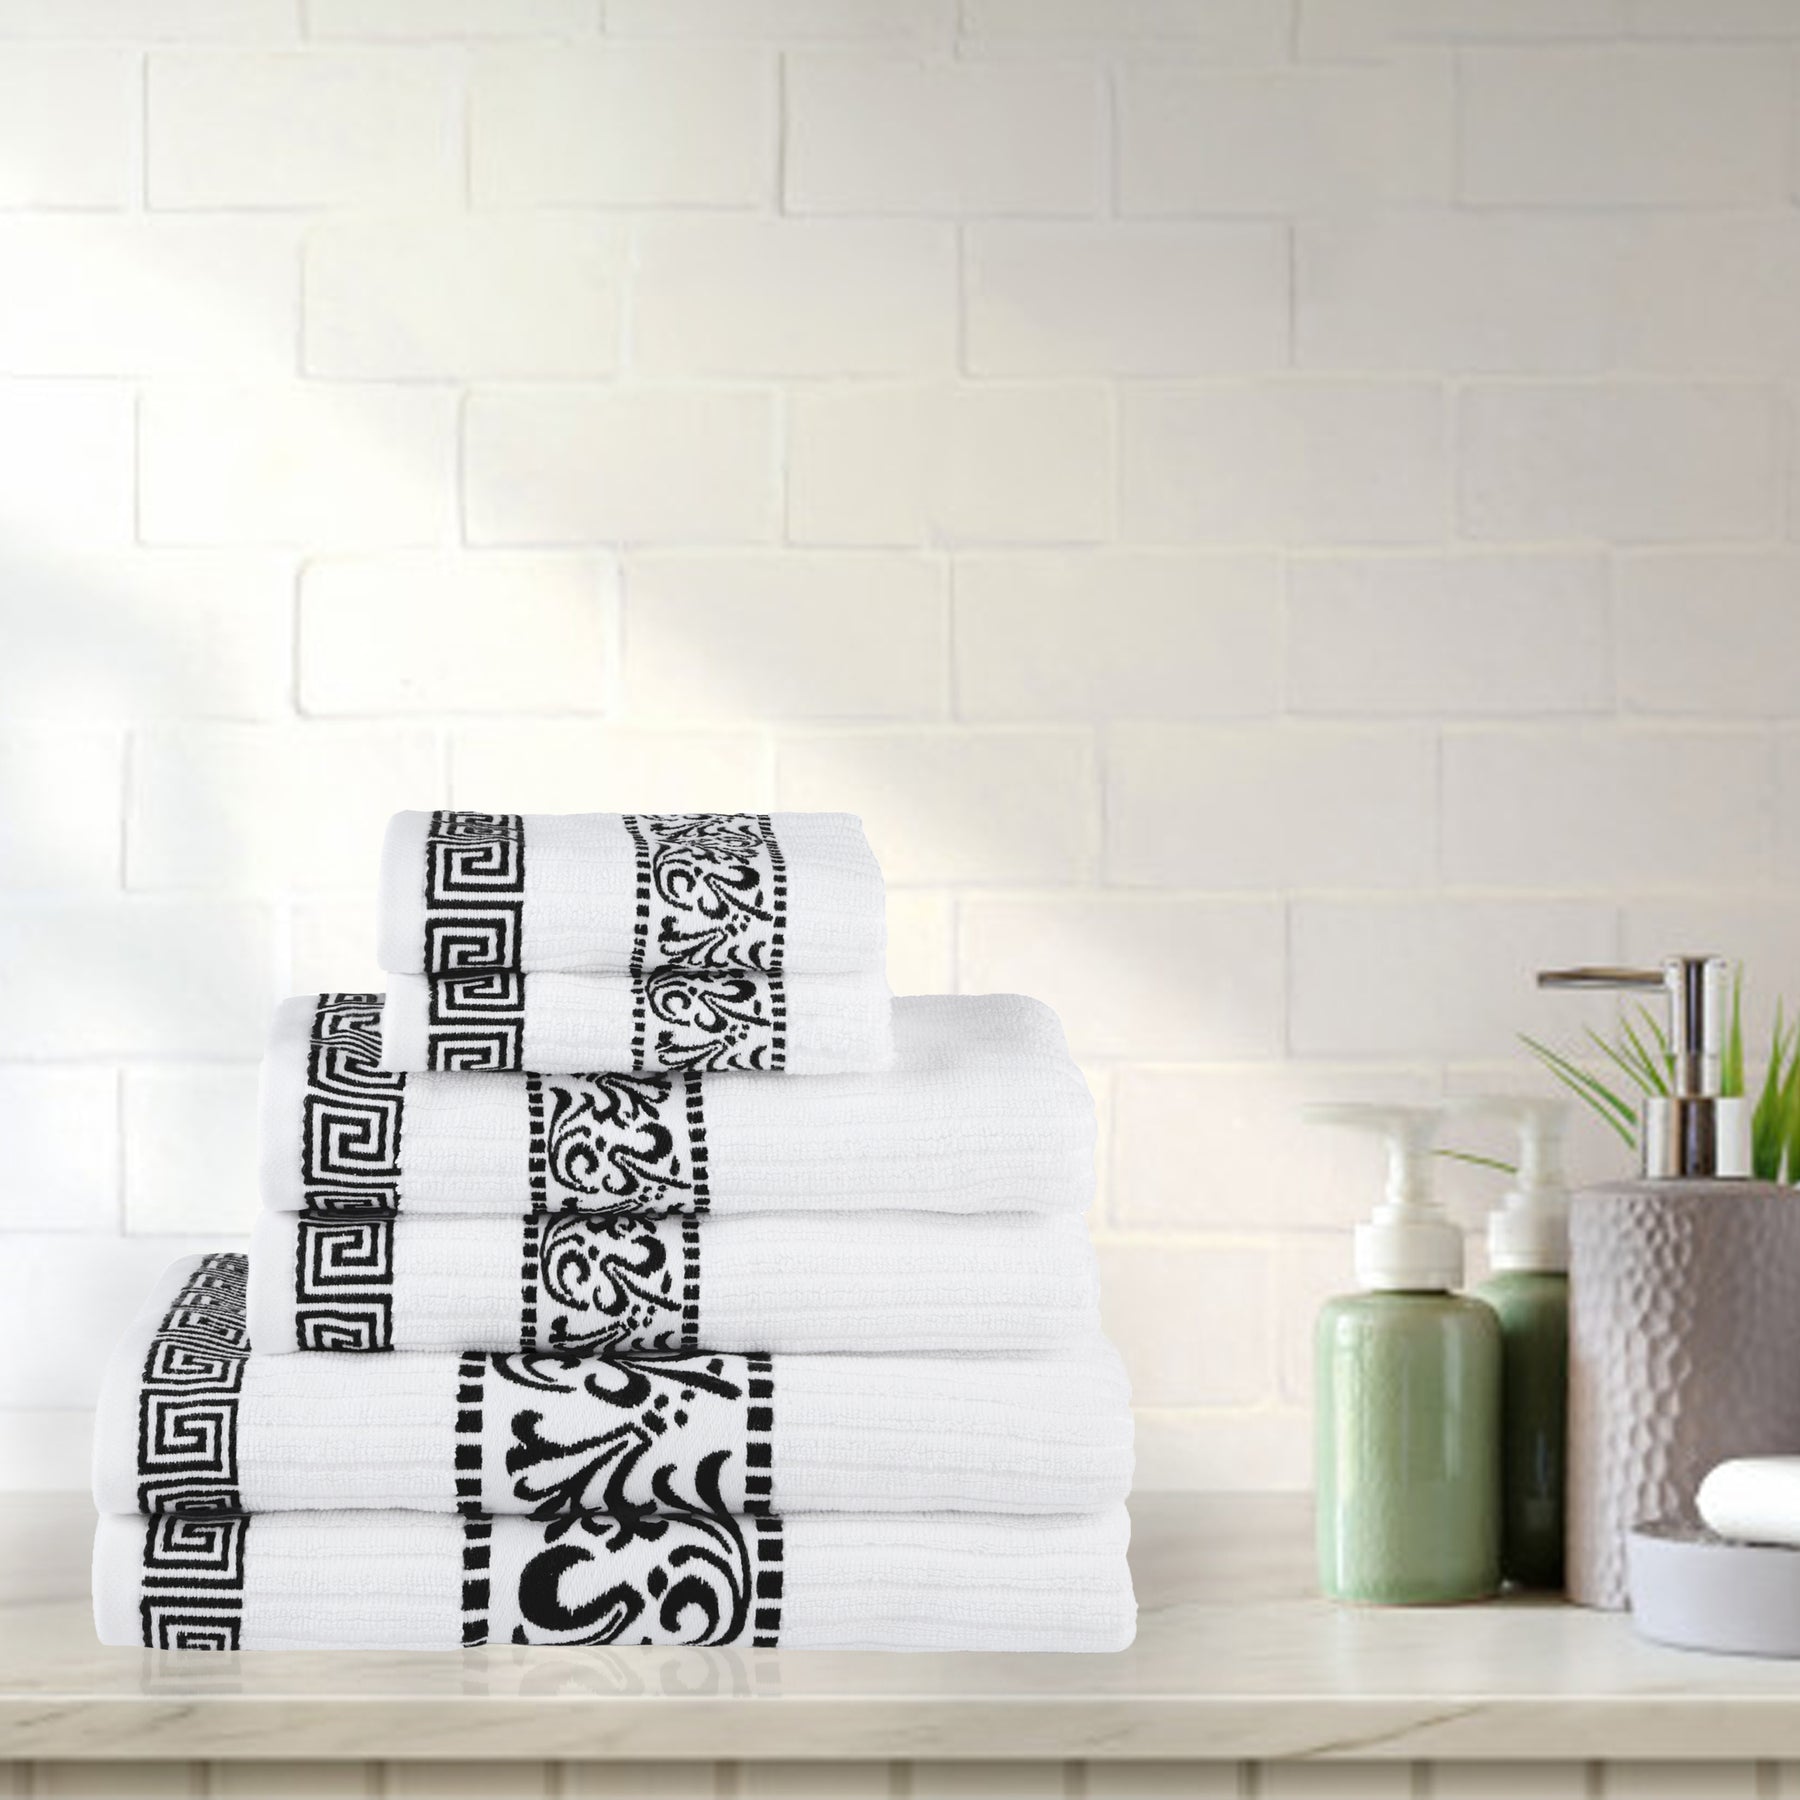 Superior Athens Cotton 6-Piece Assorted Towel Set with Greek Scroll and Floral Pattern - Black